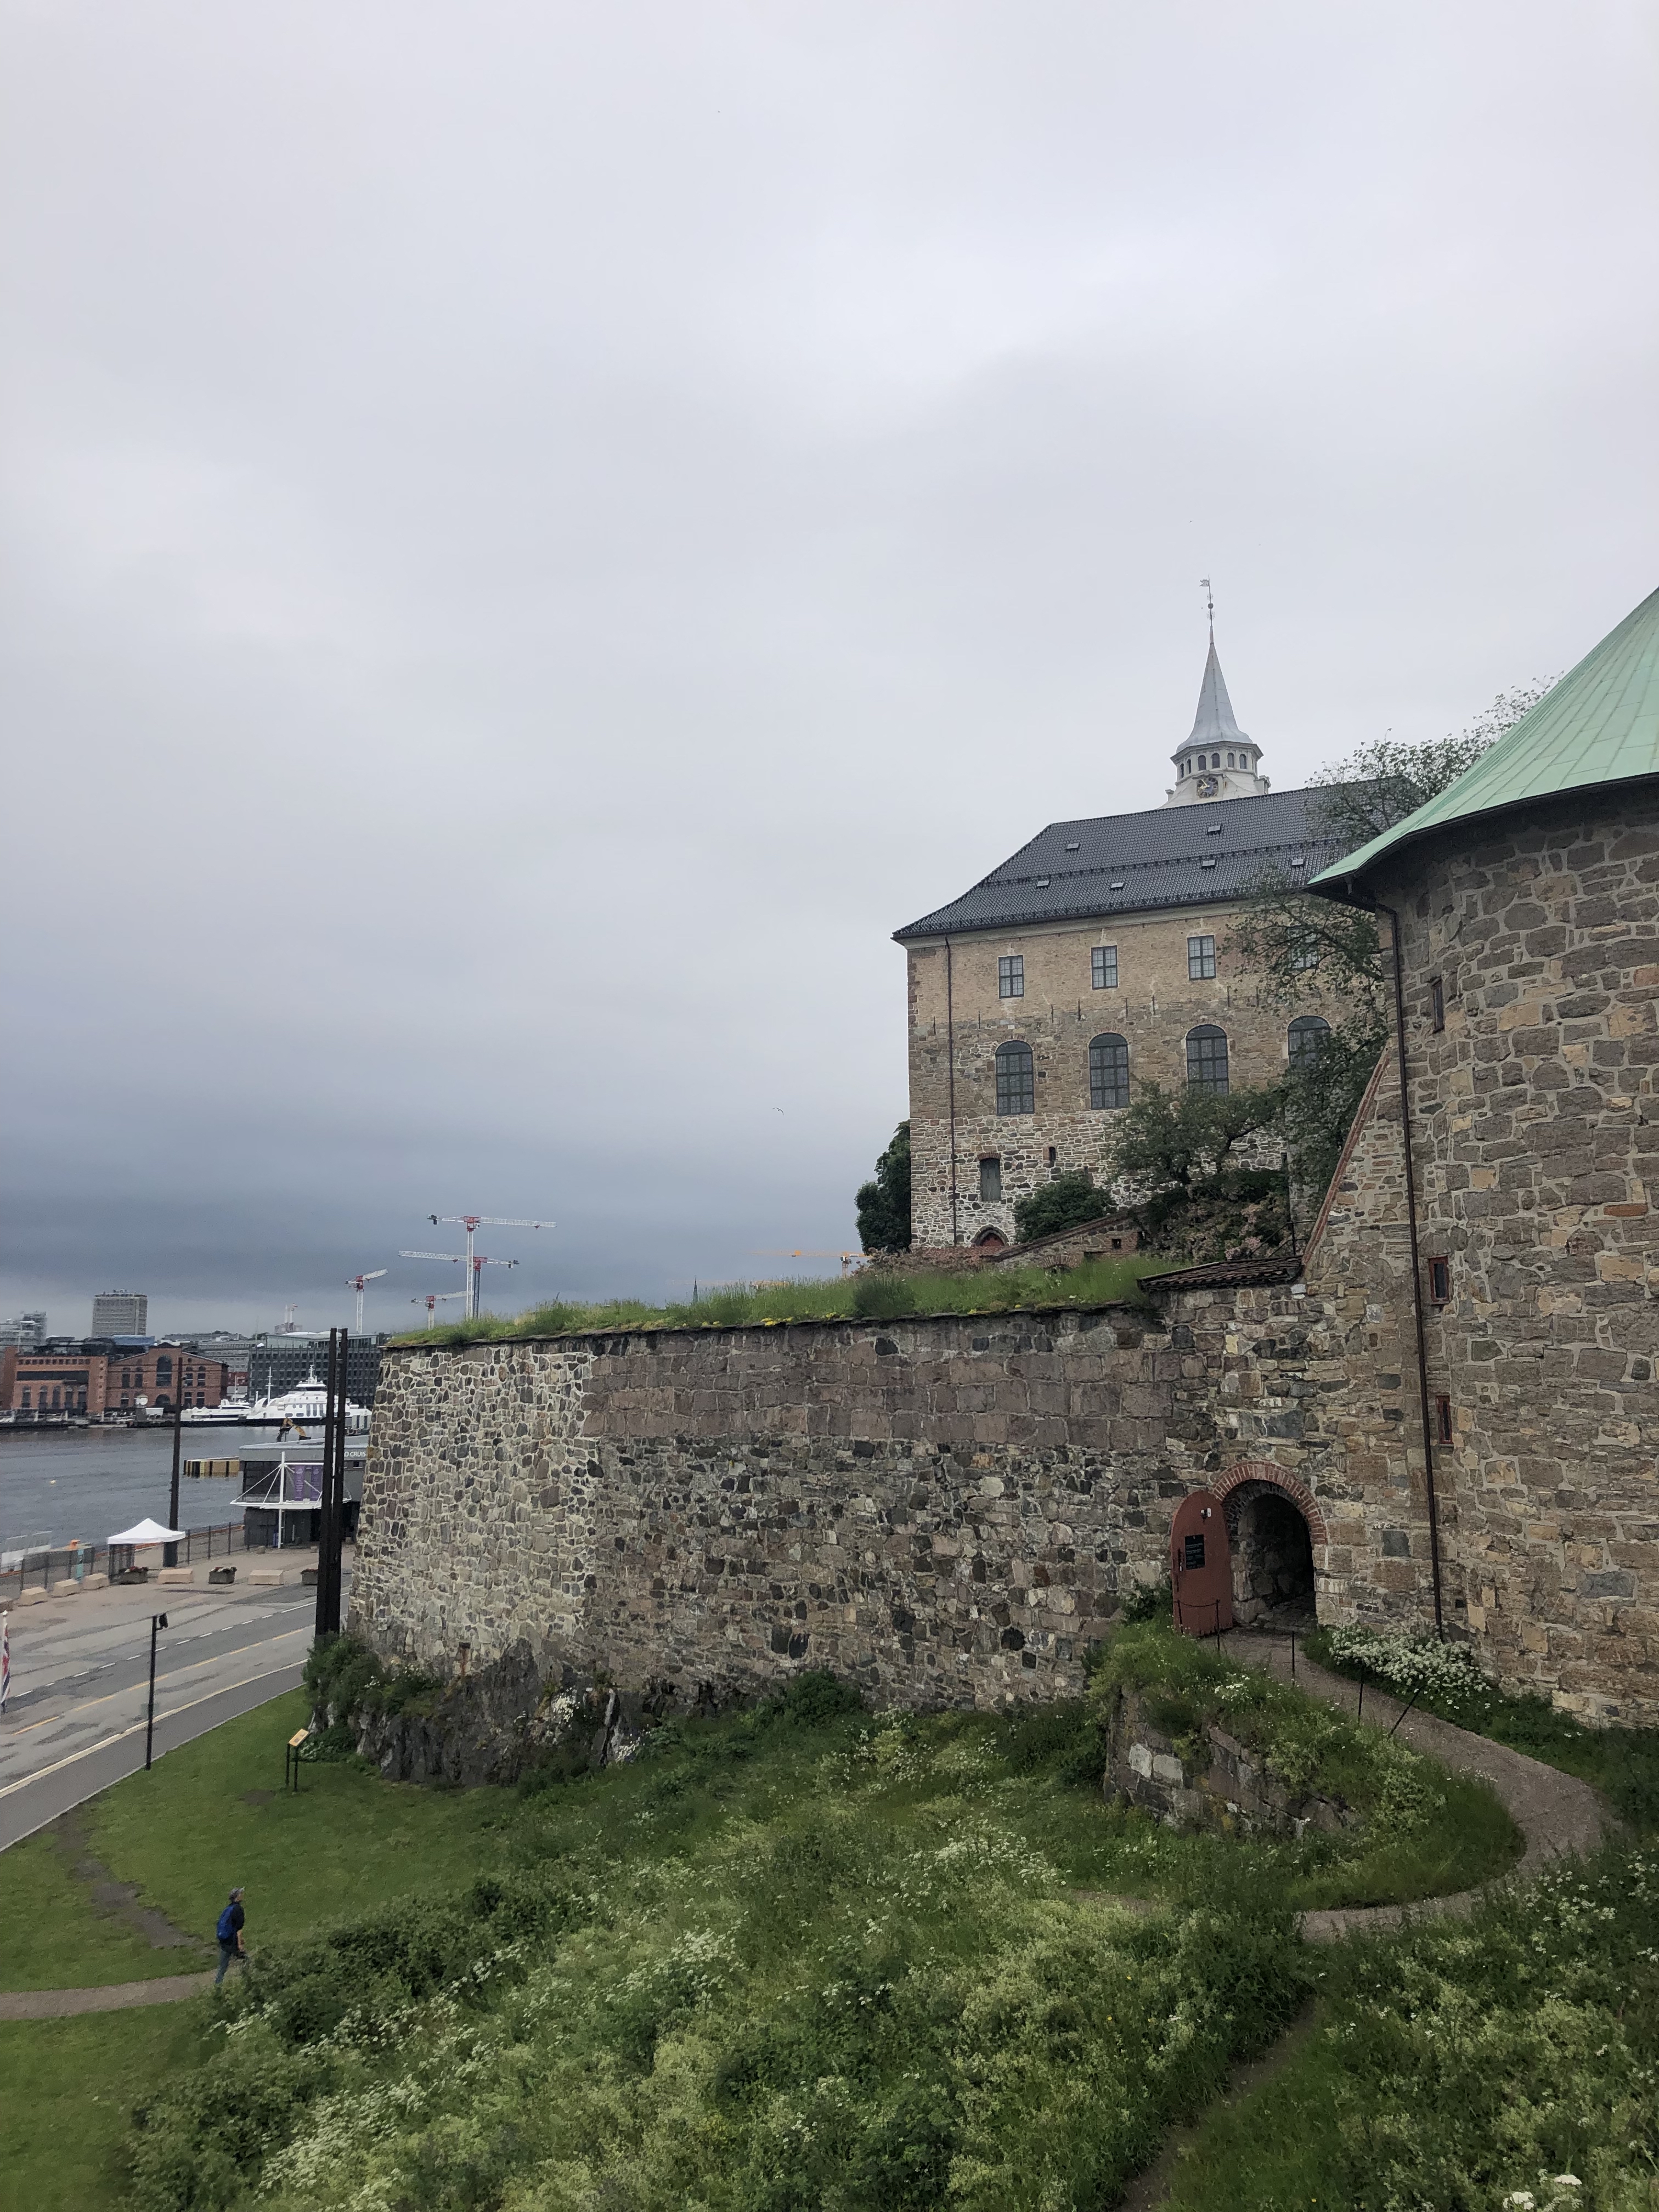 Castle in Oslo. Brick and cobblestone building with gray skies behind it.